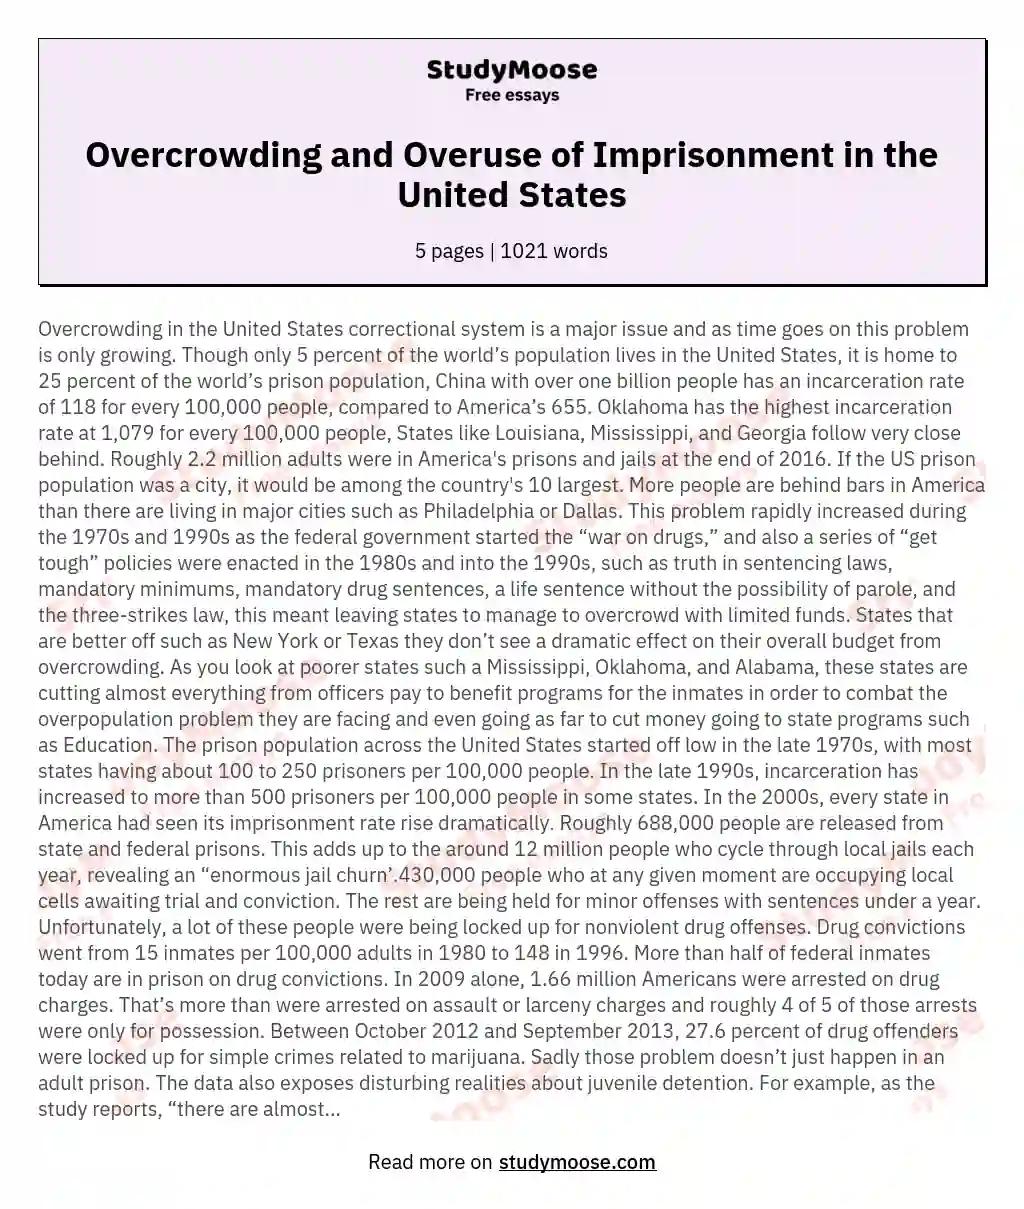 Overcrowding and Overuse of Imprisonment in the United States essay